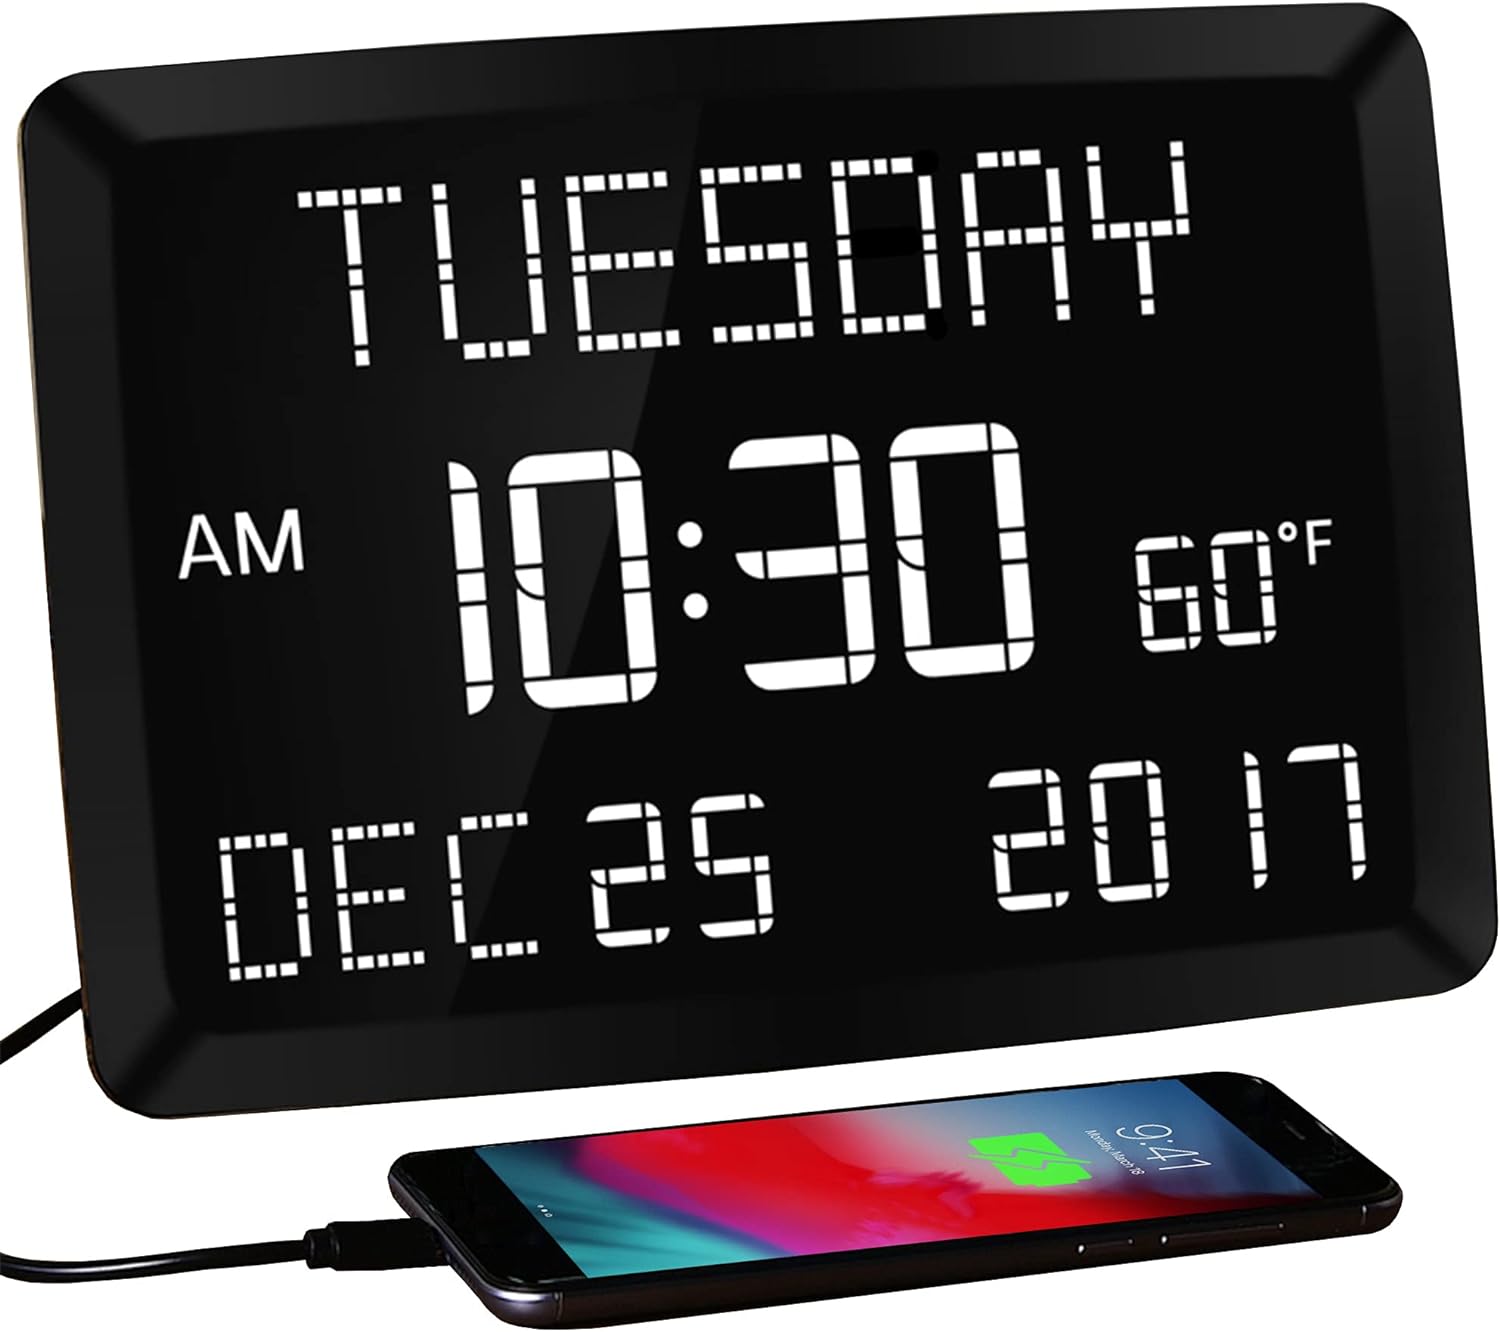 I bought this Digital Clock as a gift for a friend and he loves! The fact that shows the hours in big digital numbers. It also shows the date like day, month, year and also shows the temperature all that is a plus for him. He loved the gift and I'm happy with that.